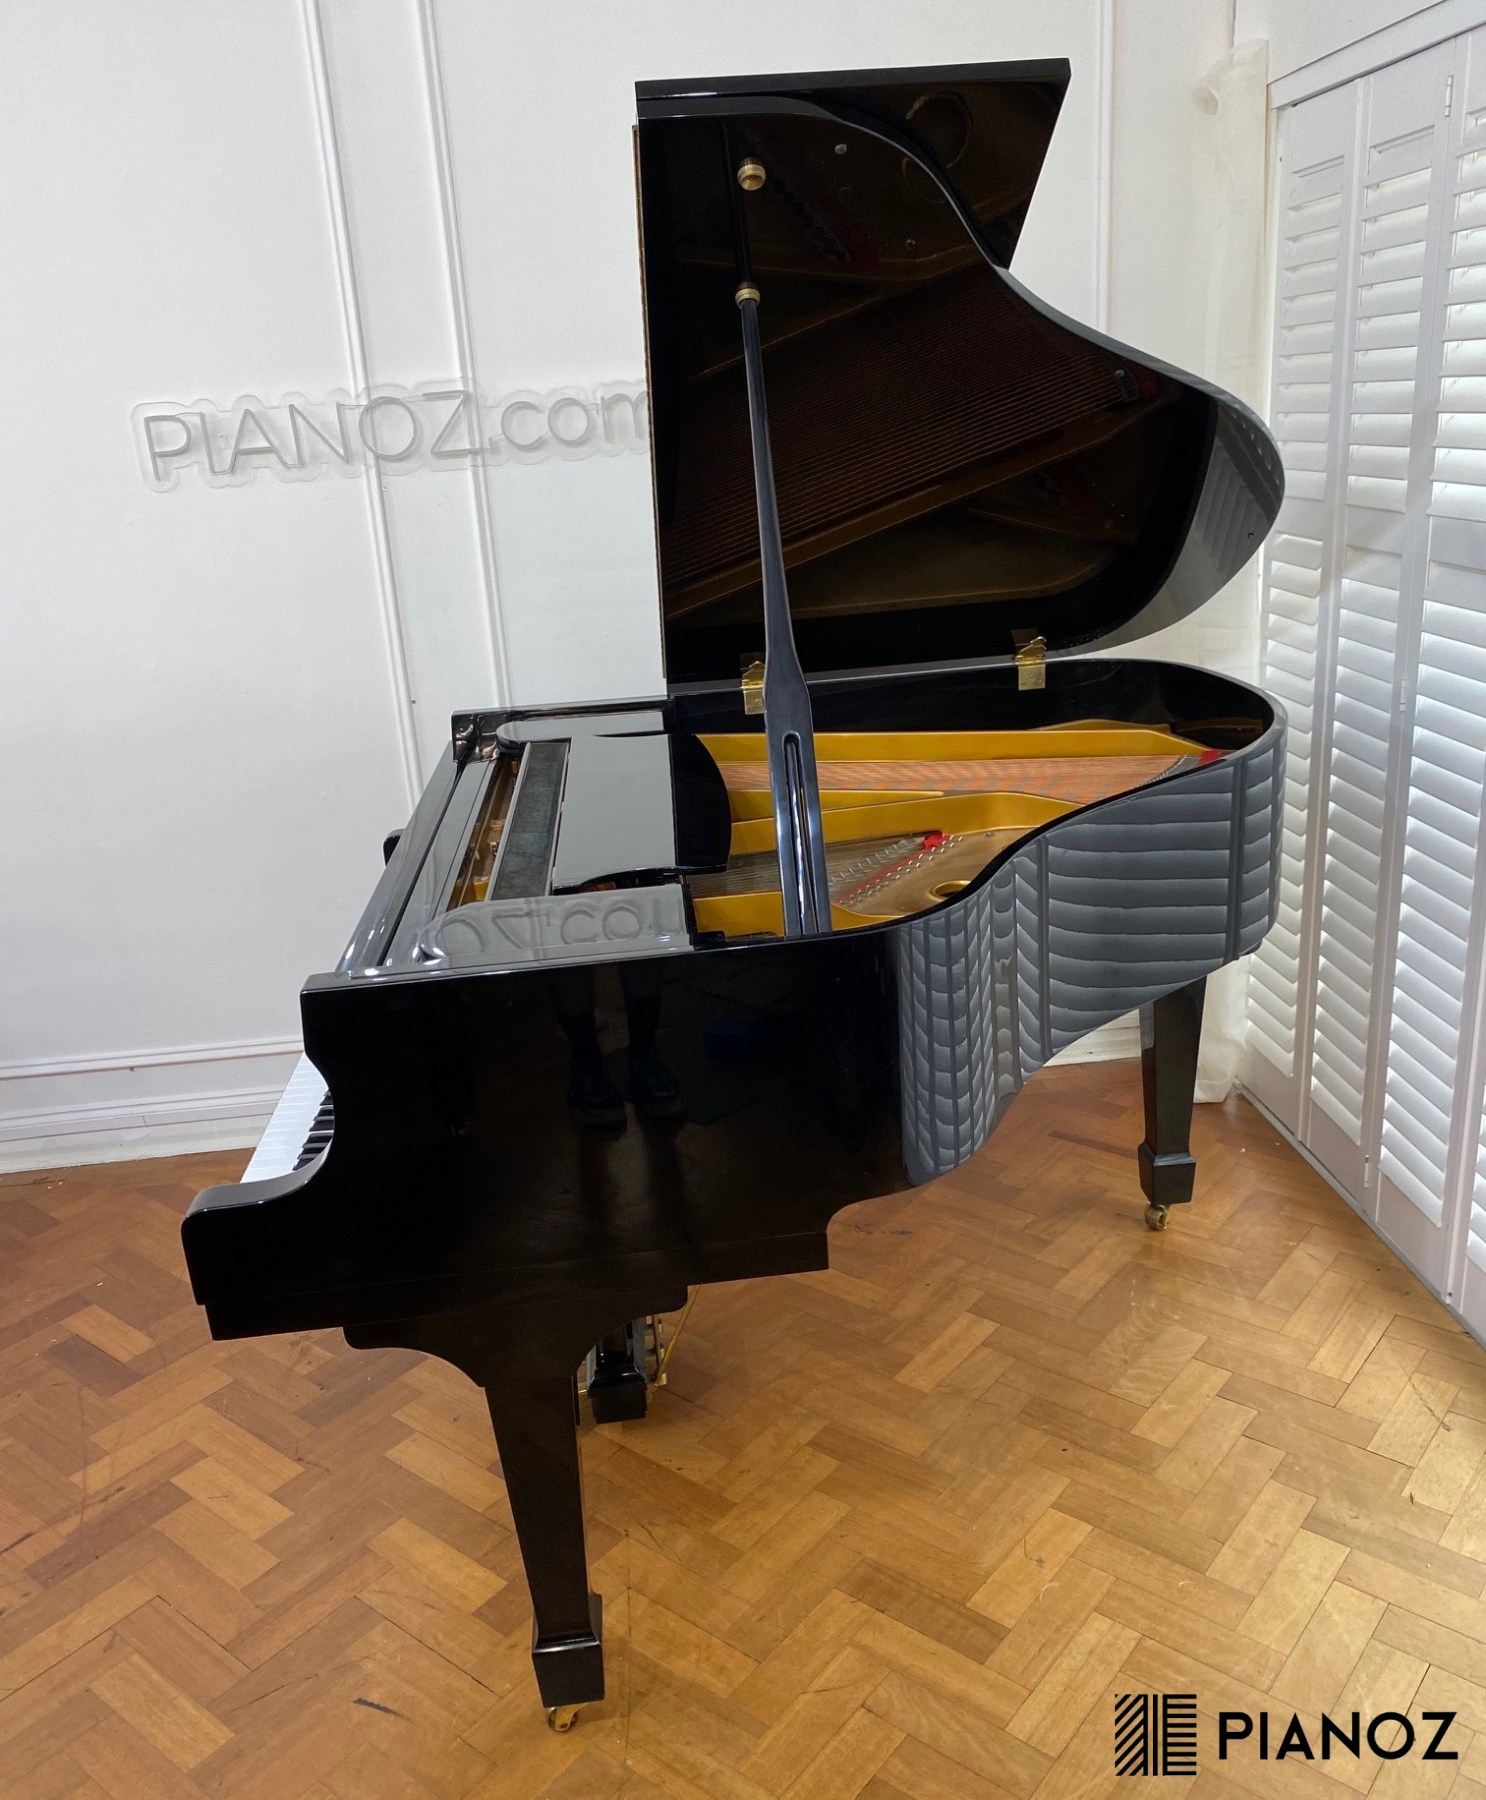 Samick Black High Gloss Baby Grand Piano piano for sale in UK